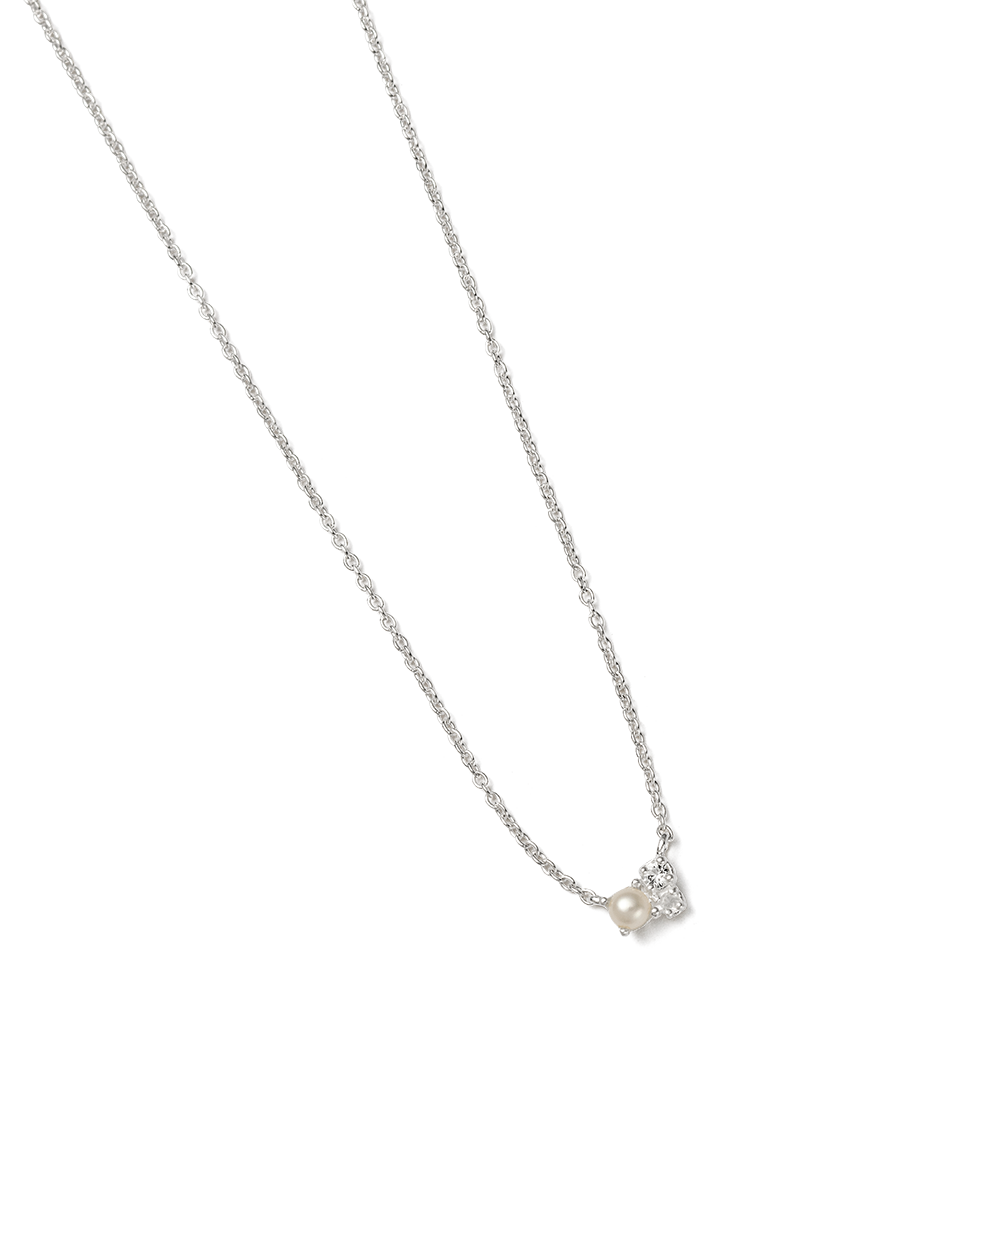 FIRST LIGHT NECKLACE (STERLING SILVER) - IMAGE 4